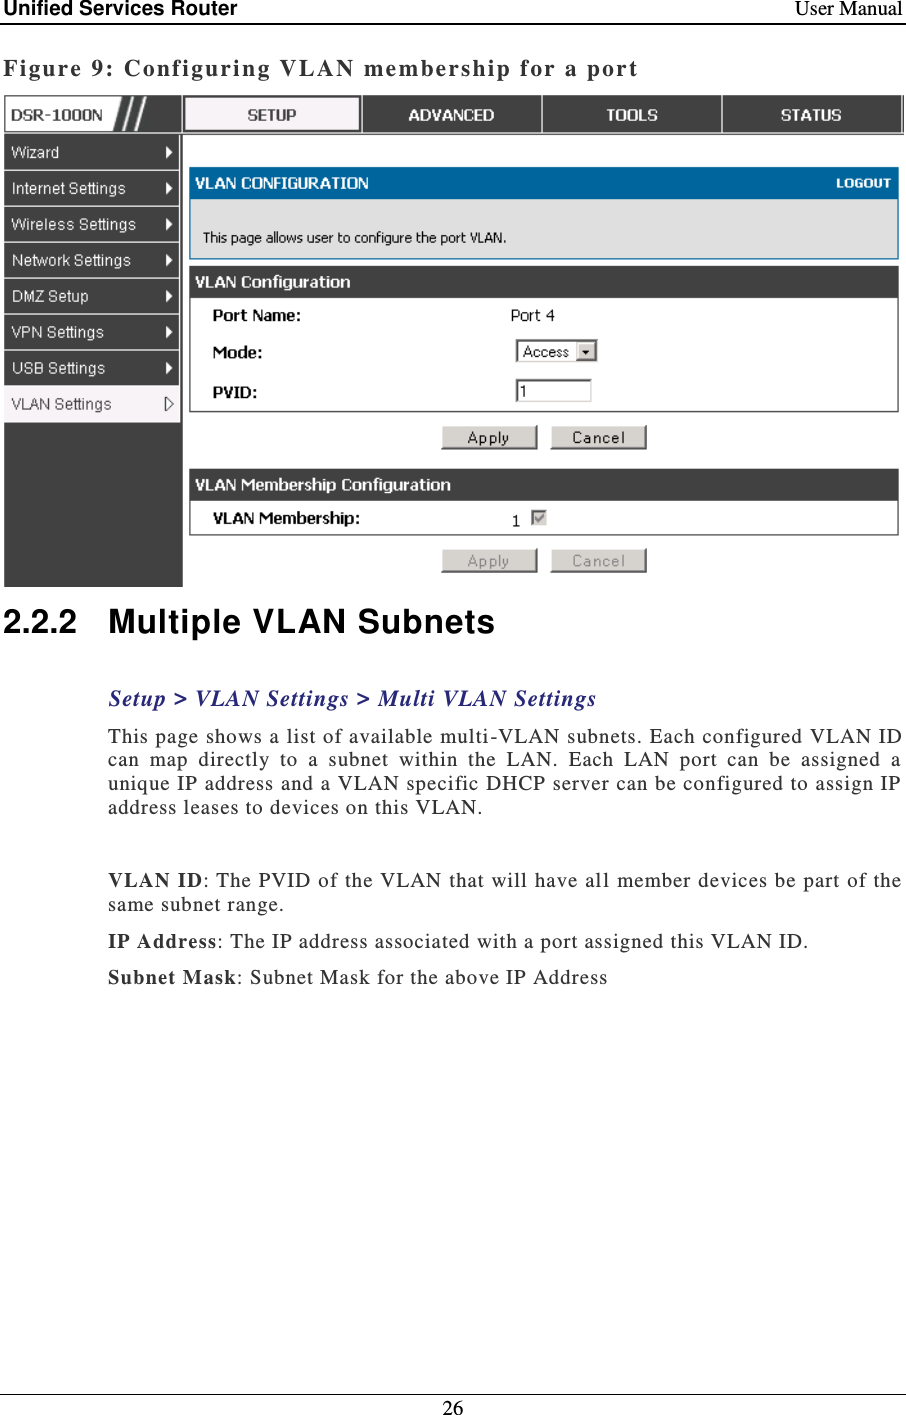 Unified Services Router    User Manual 26  Figure 9: Configuring VLAN me mbership for a port   2.2.2  Multiple VLAN Subnets Setup &gt; VLAN Settings &gt; Multi VLAN Settings This page shows a list of available multi -VLAN subnets. Each configured VLAN ID can  map  directly  to  a  subnet  within  the  LAN.  Each  LAN  port  can  be  assigned  a unique IP address and a VLAN specific DHCP server can be configured to assign IP address leases to devices on this VLAN.   VLAN ID: The PVID of  the VLAN  that  will have all member devices be part of the same subnet range. IP Address: The IP address associated with a port assigned this VLAN ID.  Subnet Mask: Subnet Mask for the above IP Address  